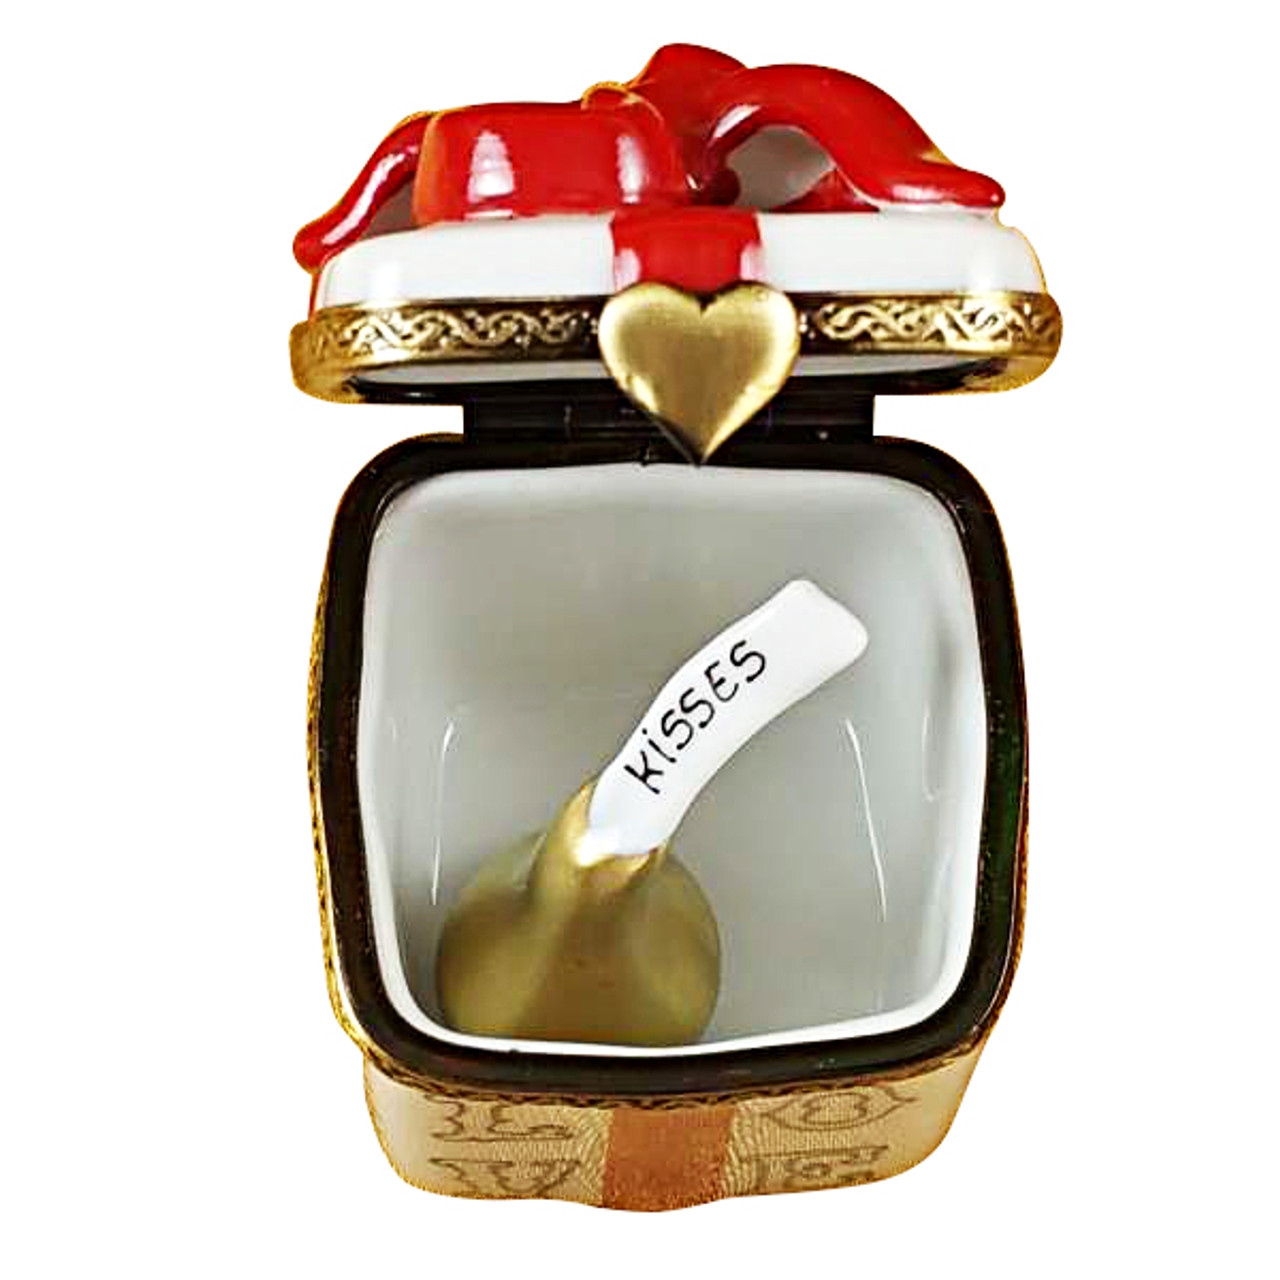 Love Gift Box With Xo/Xo And Removable Kiss Rochard Limoges Box